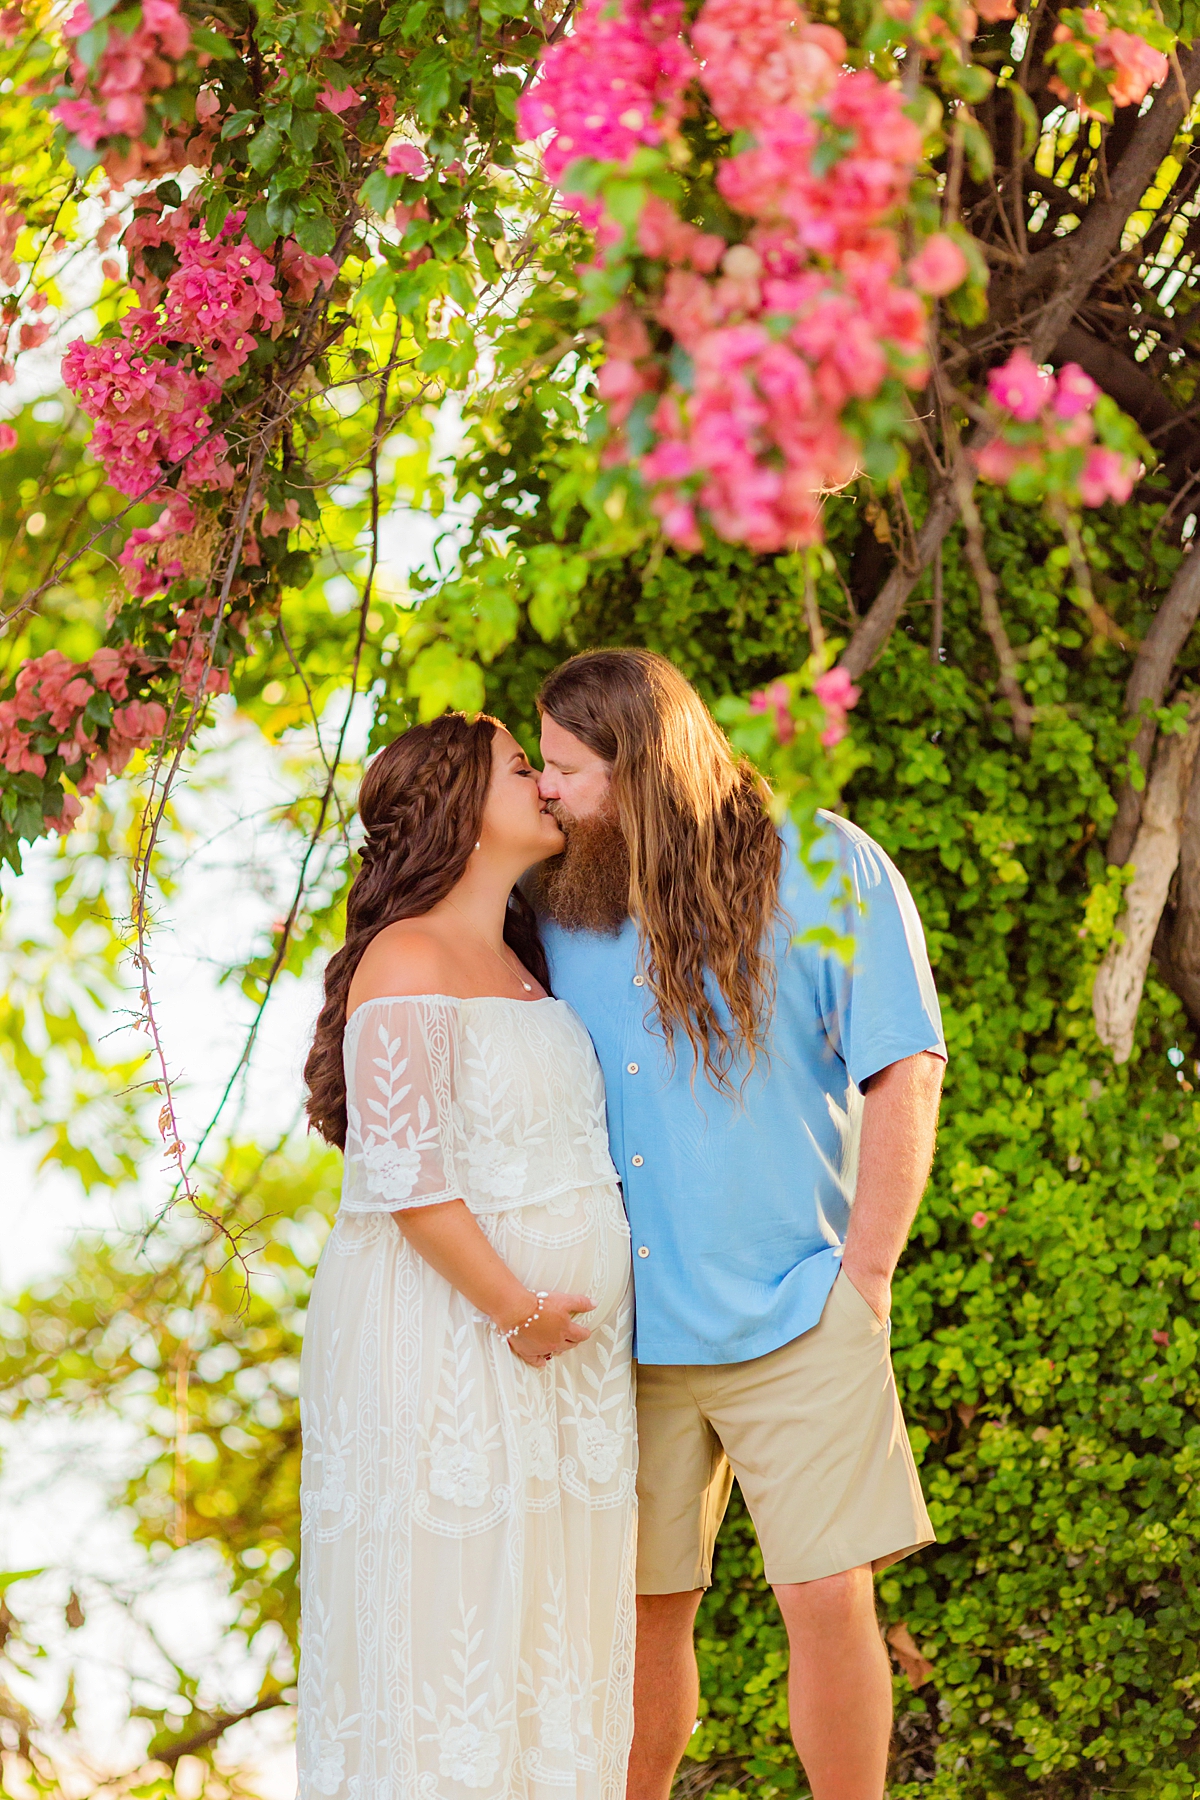 Beautiful Maui beach maternity session with bougainvillea in foreground